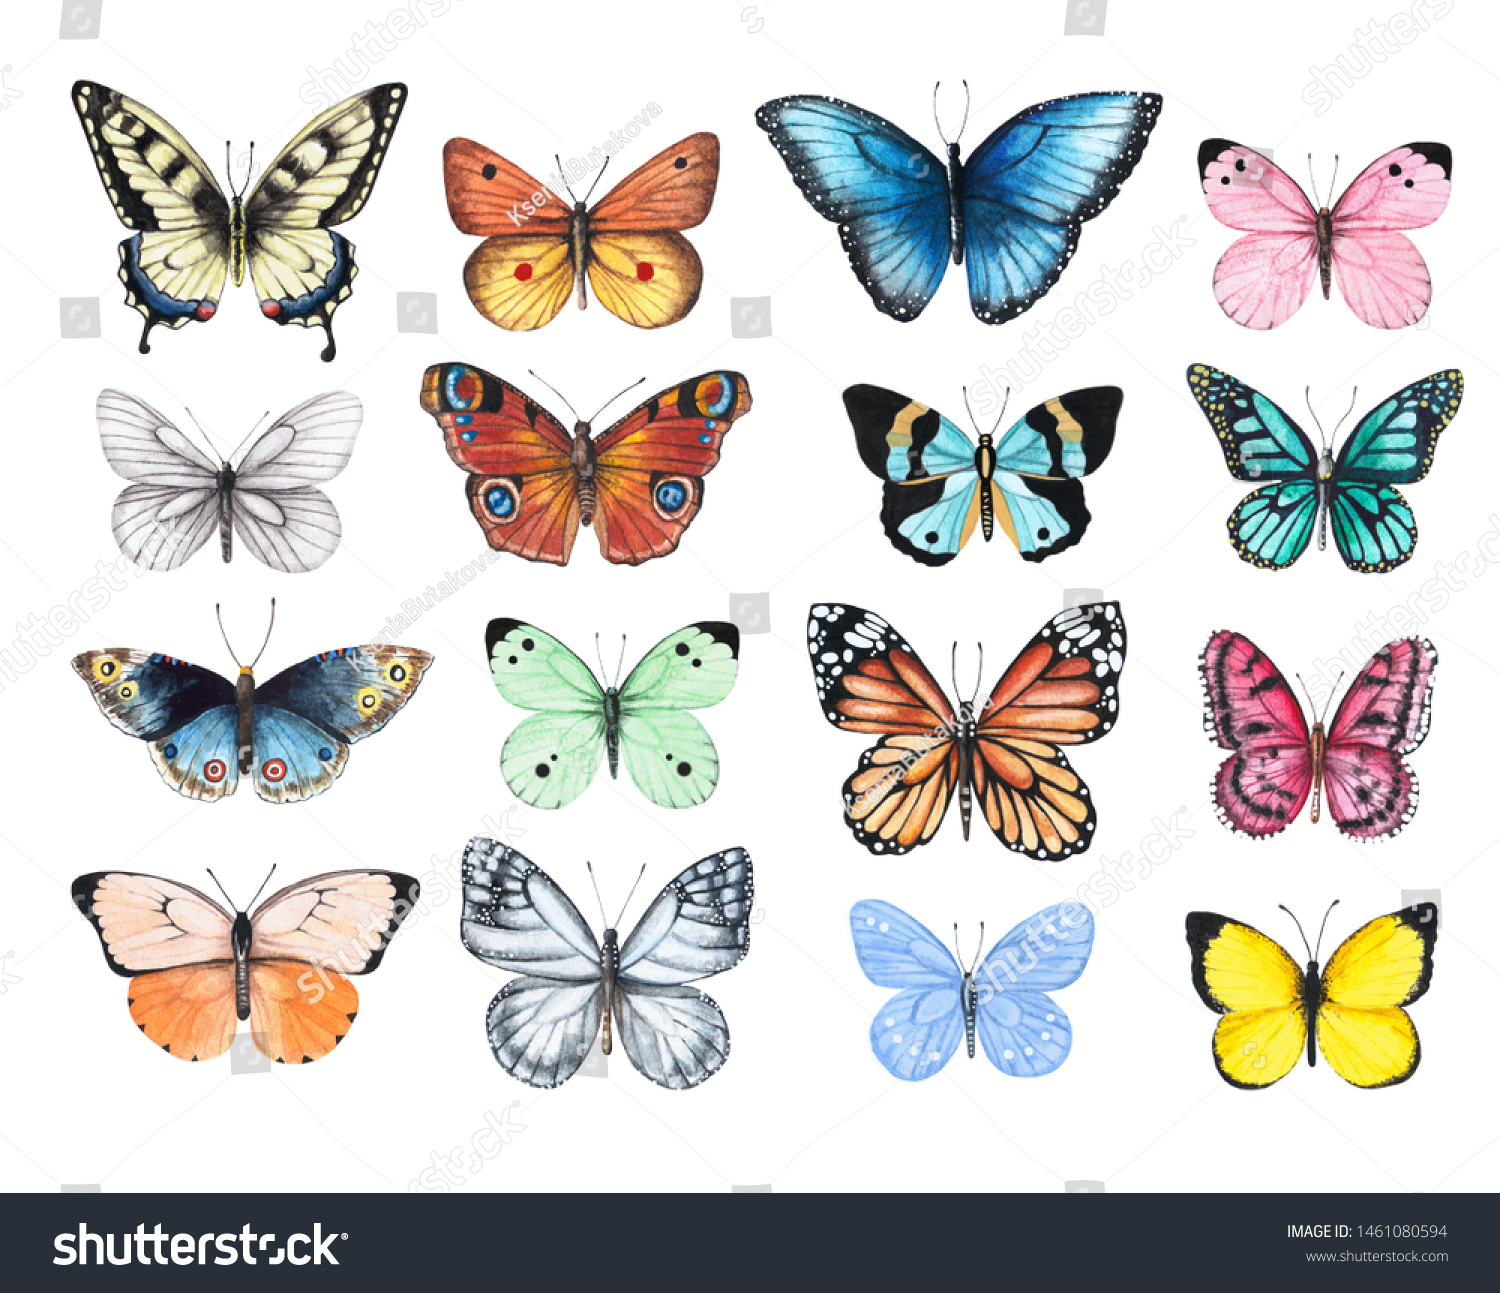 Set Watercolor Illustrations Depicting Bright Butterflies Stock ...